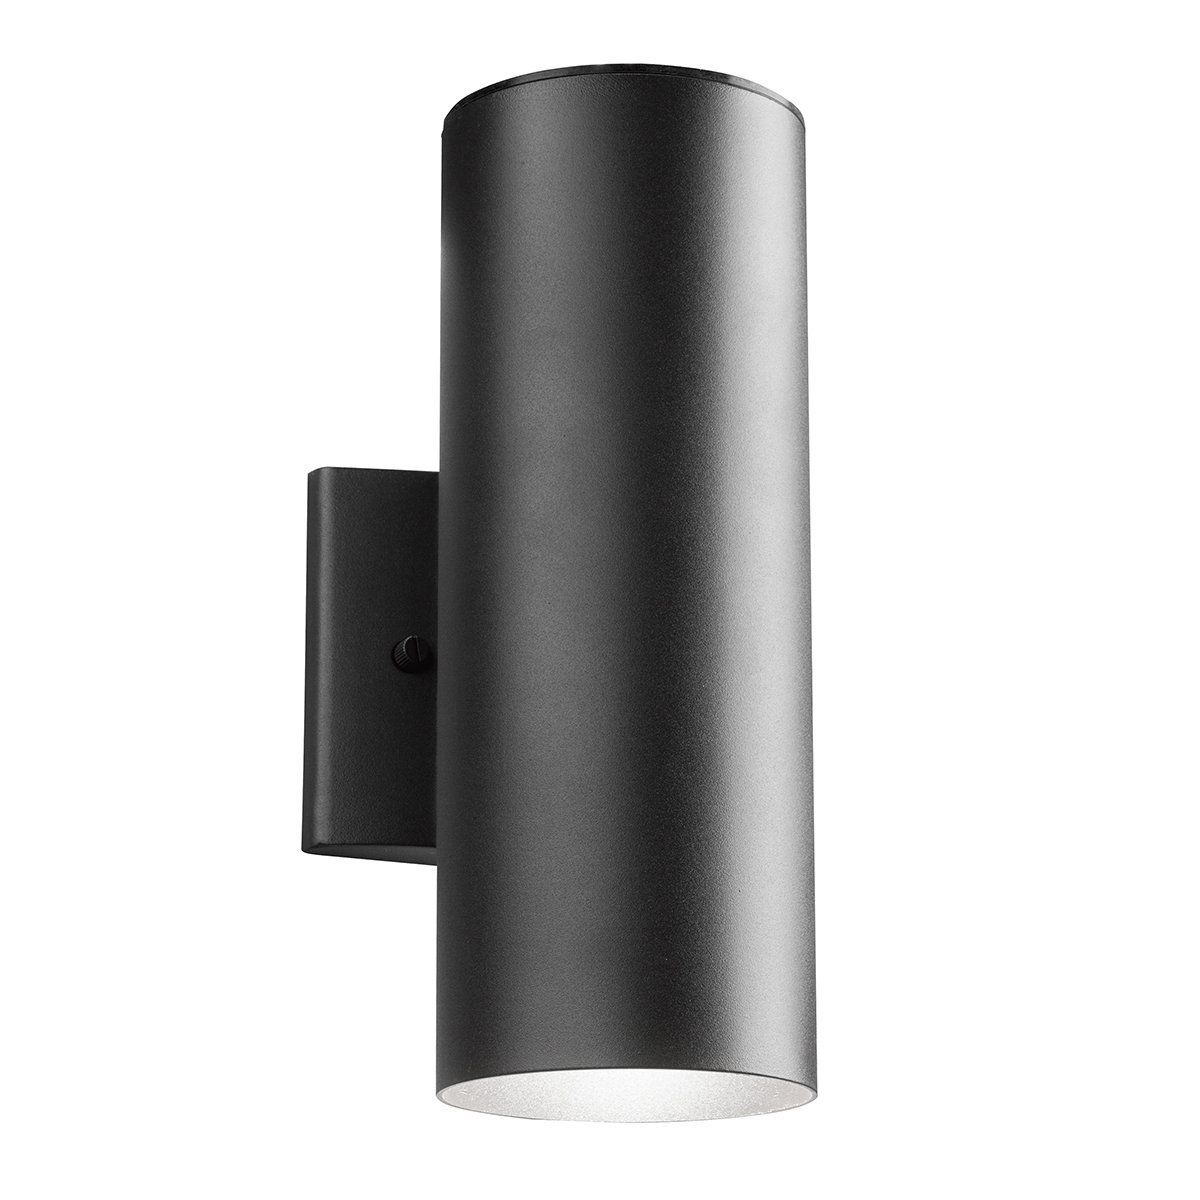 Furniture : Allen Roth Bronze Outdoor Wall Mounted Light Lighting Within Outdoor Wall Lighting At Amazon (View 10 of 15)